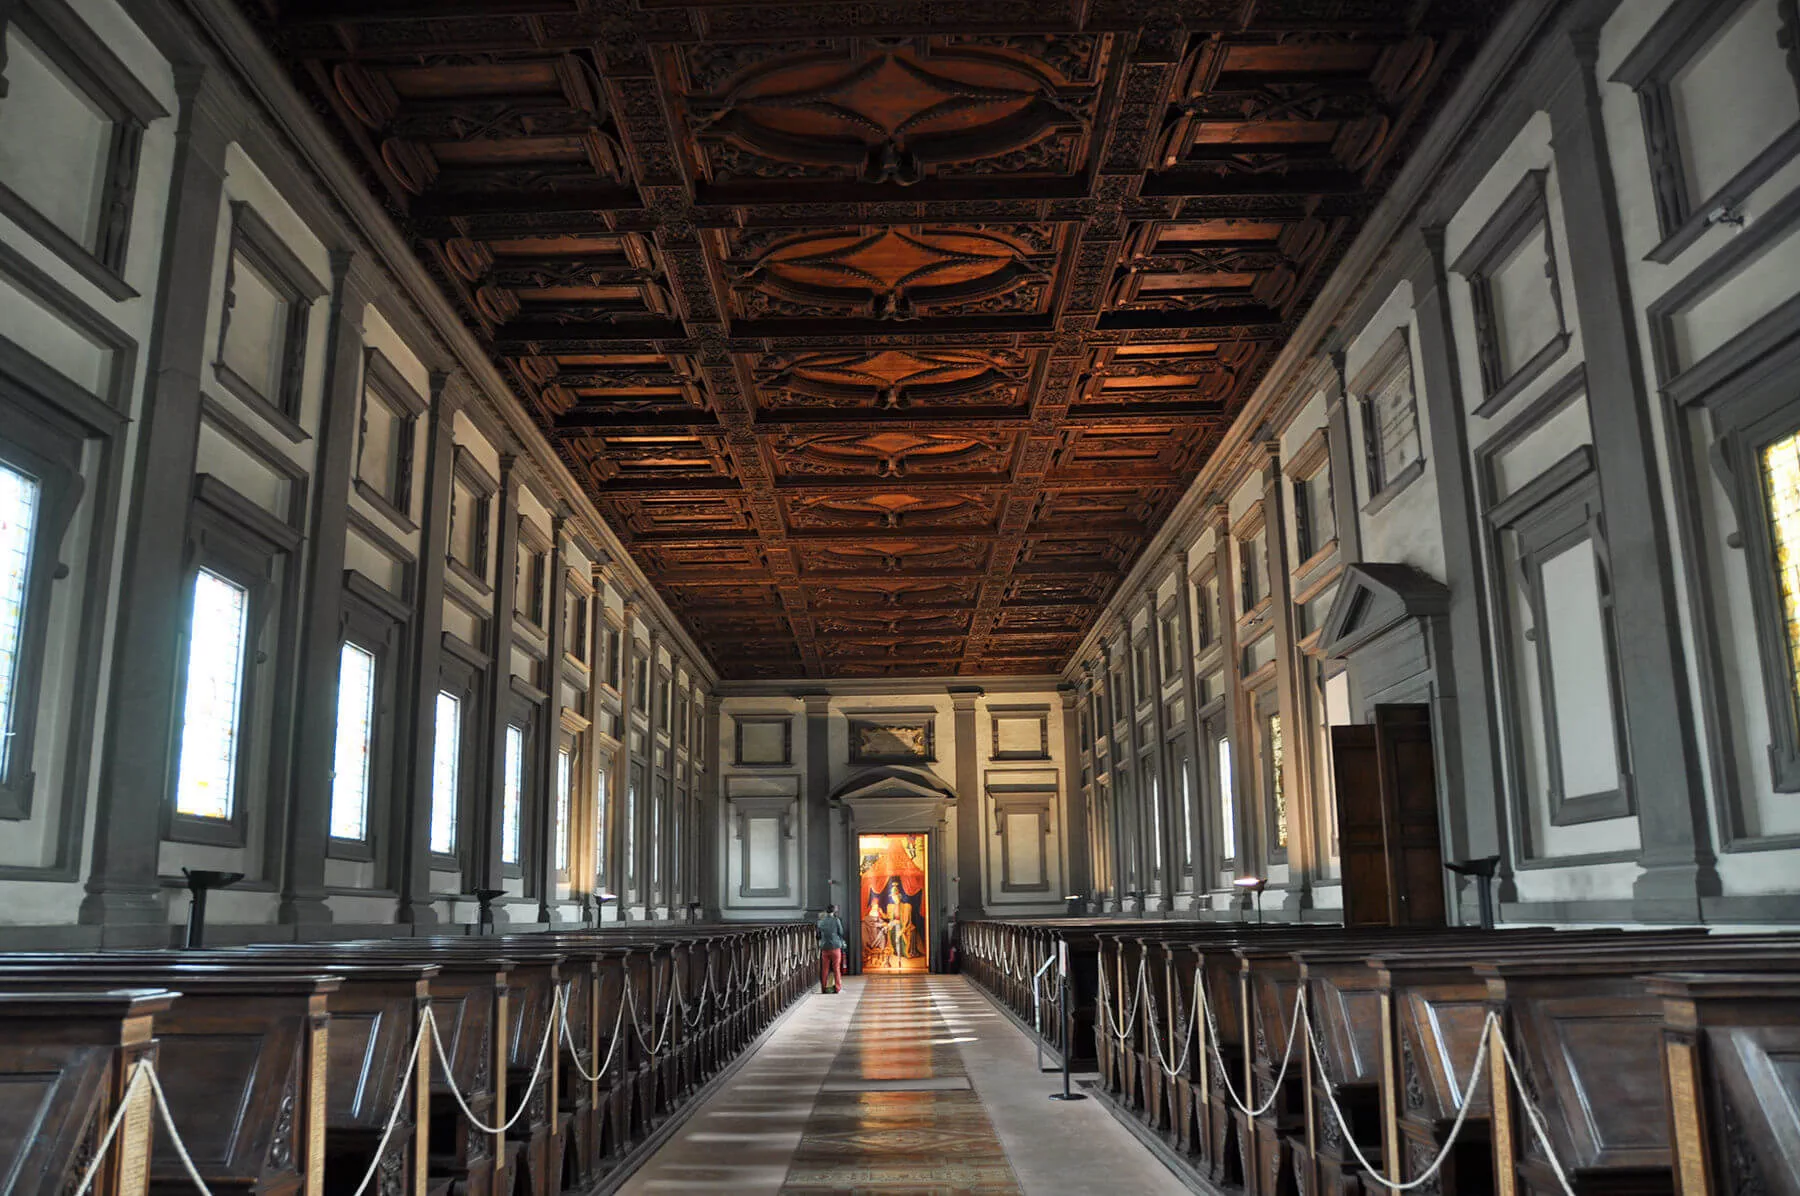 The reading room at the Laurentian Medici library has the quiet grace of a Renaissance church